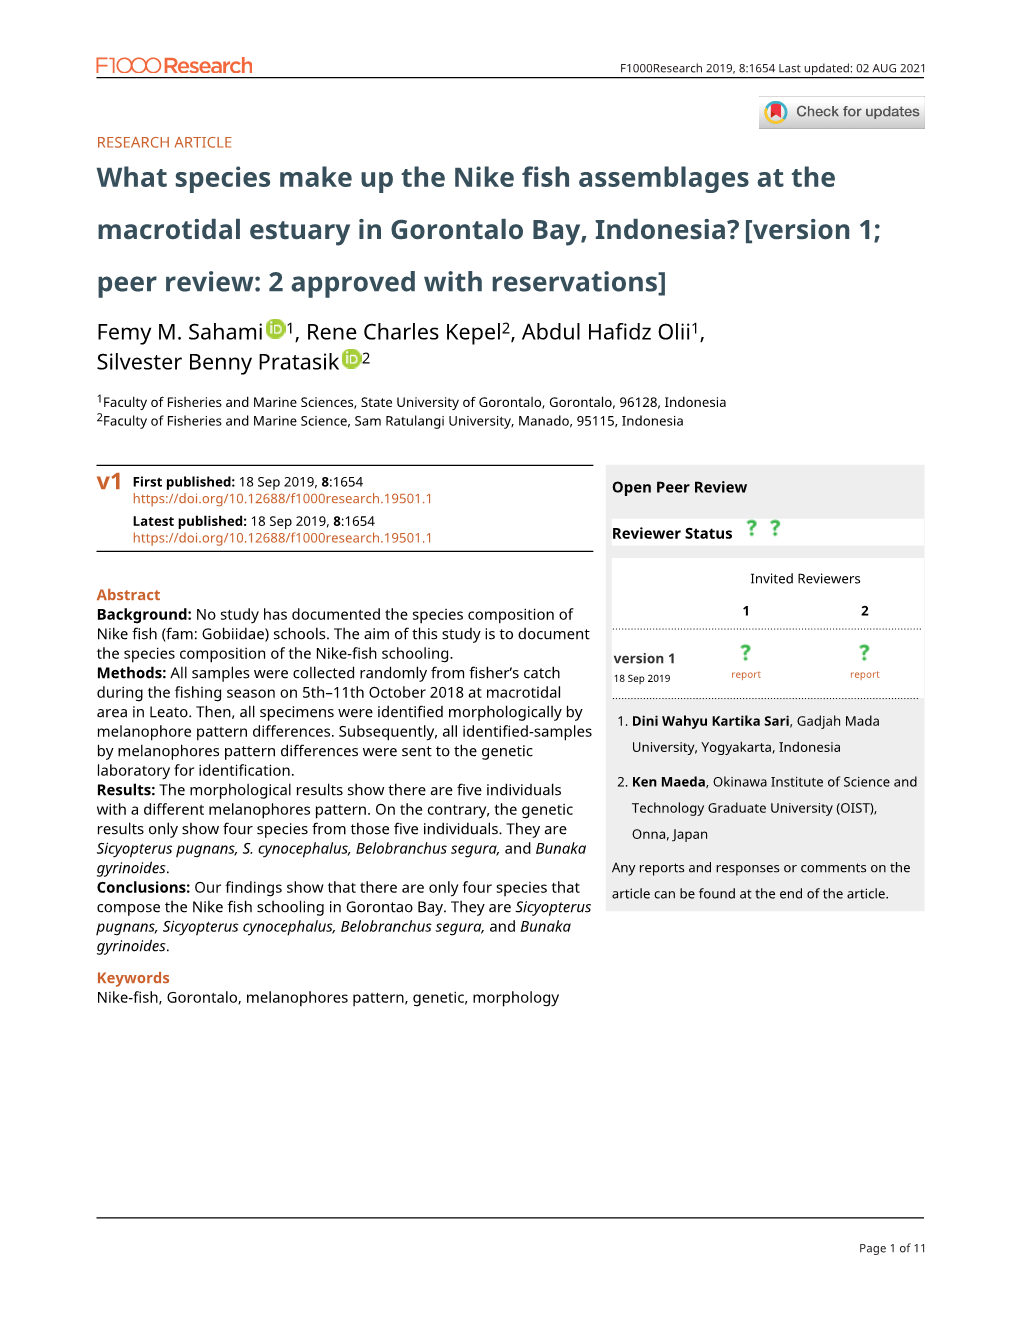 What Species Make up the Nike Fish Assemblages at the Macrotidal Estuary in Gorontalo Bay, Indonesia? [Version 1; Peer Review: 2 Approved with Reservations]